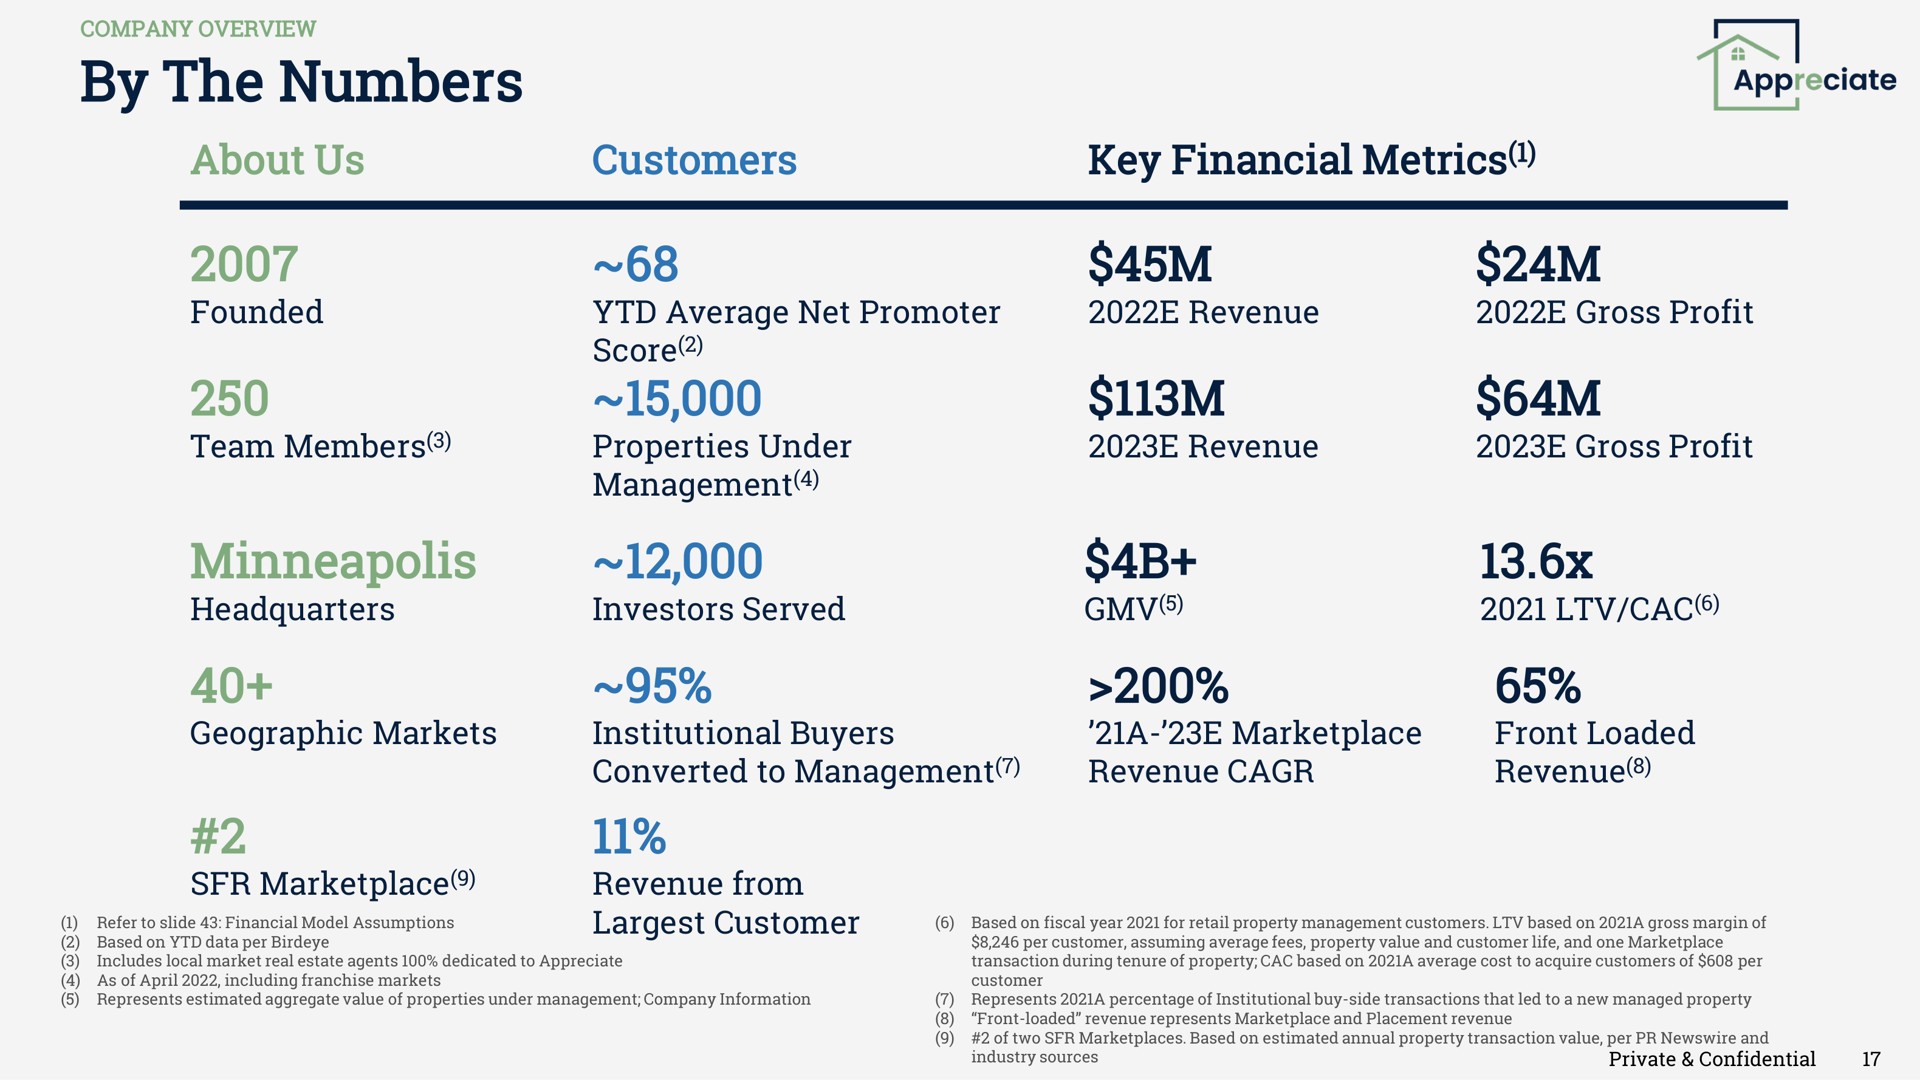 by the numbers about us customers key financial metrics | Appreciate